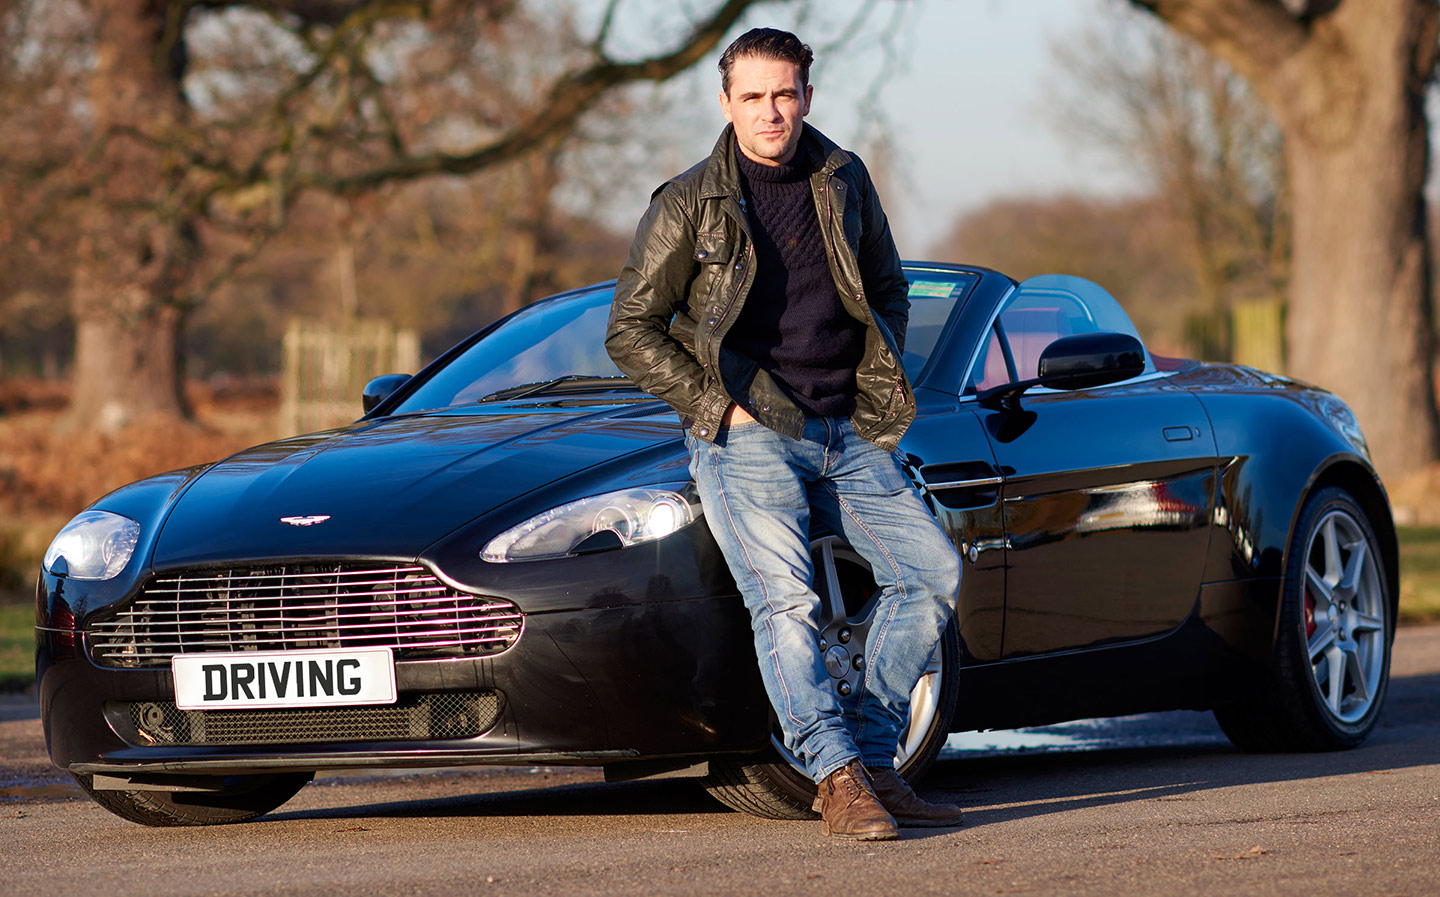 Me and My Motor: Levison Wood, explorer, picks a comfy ride for his next trek